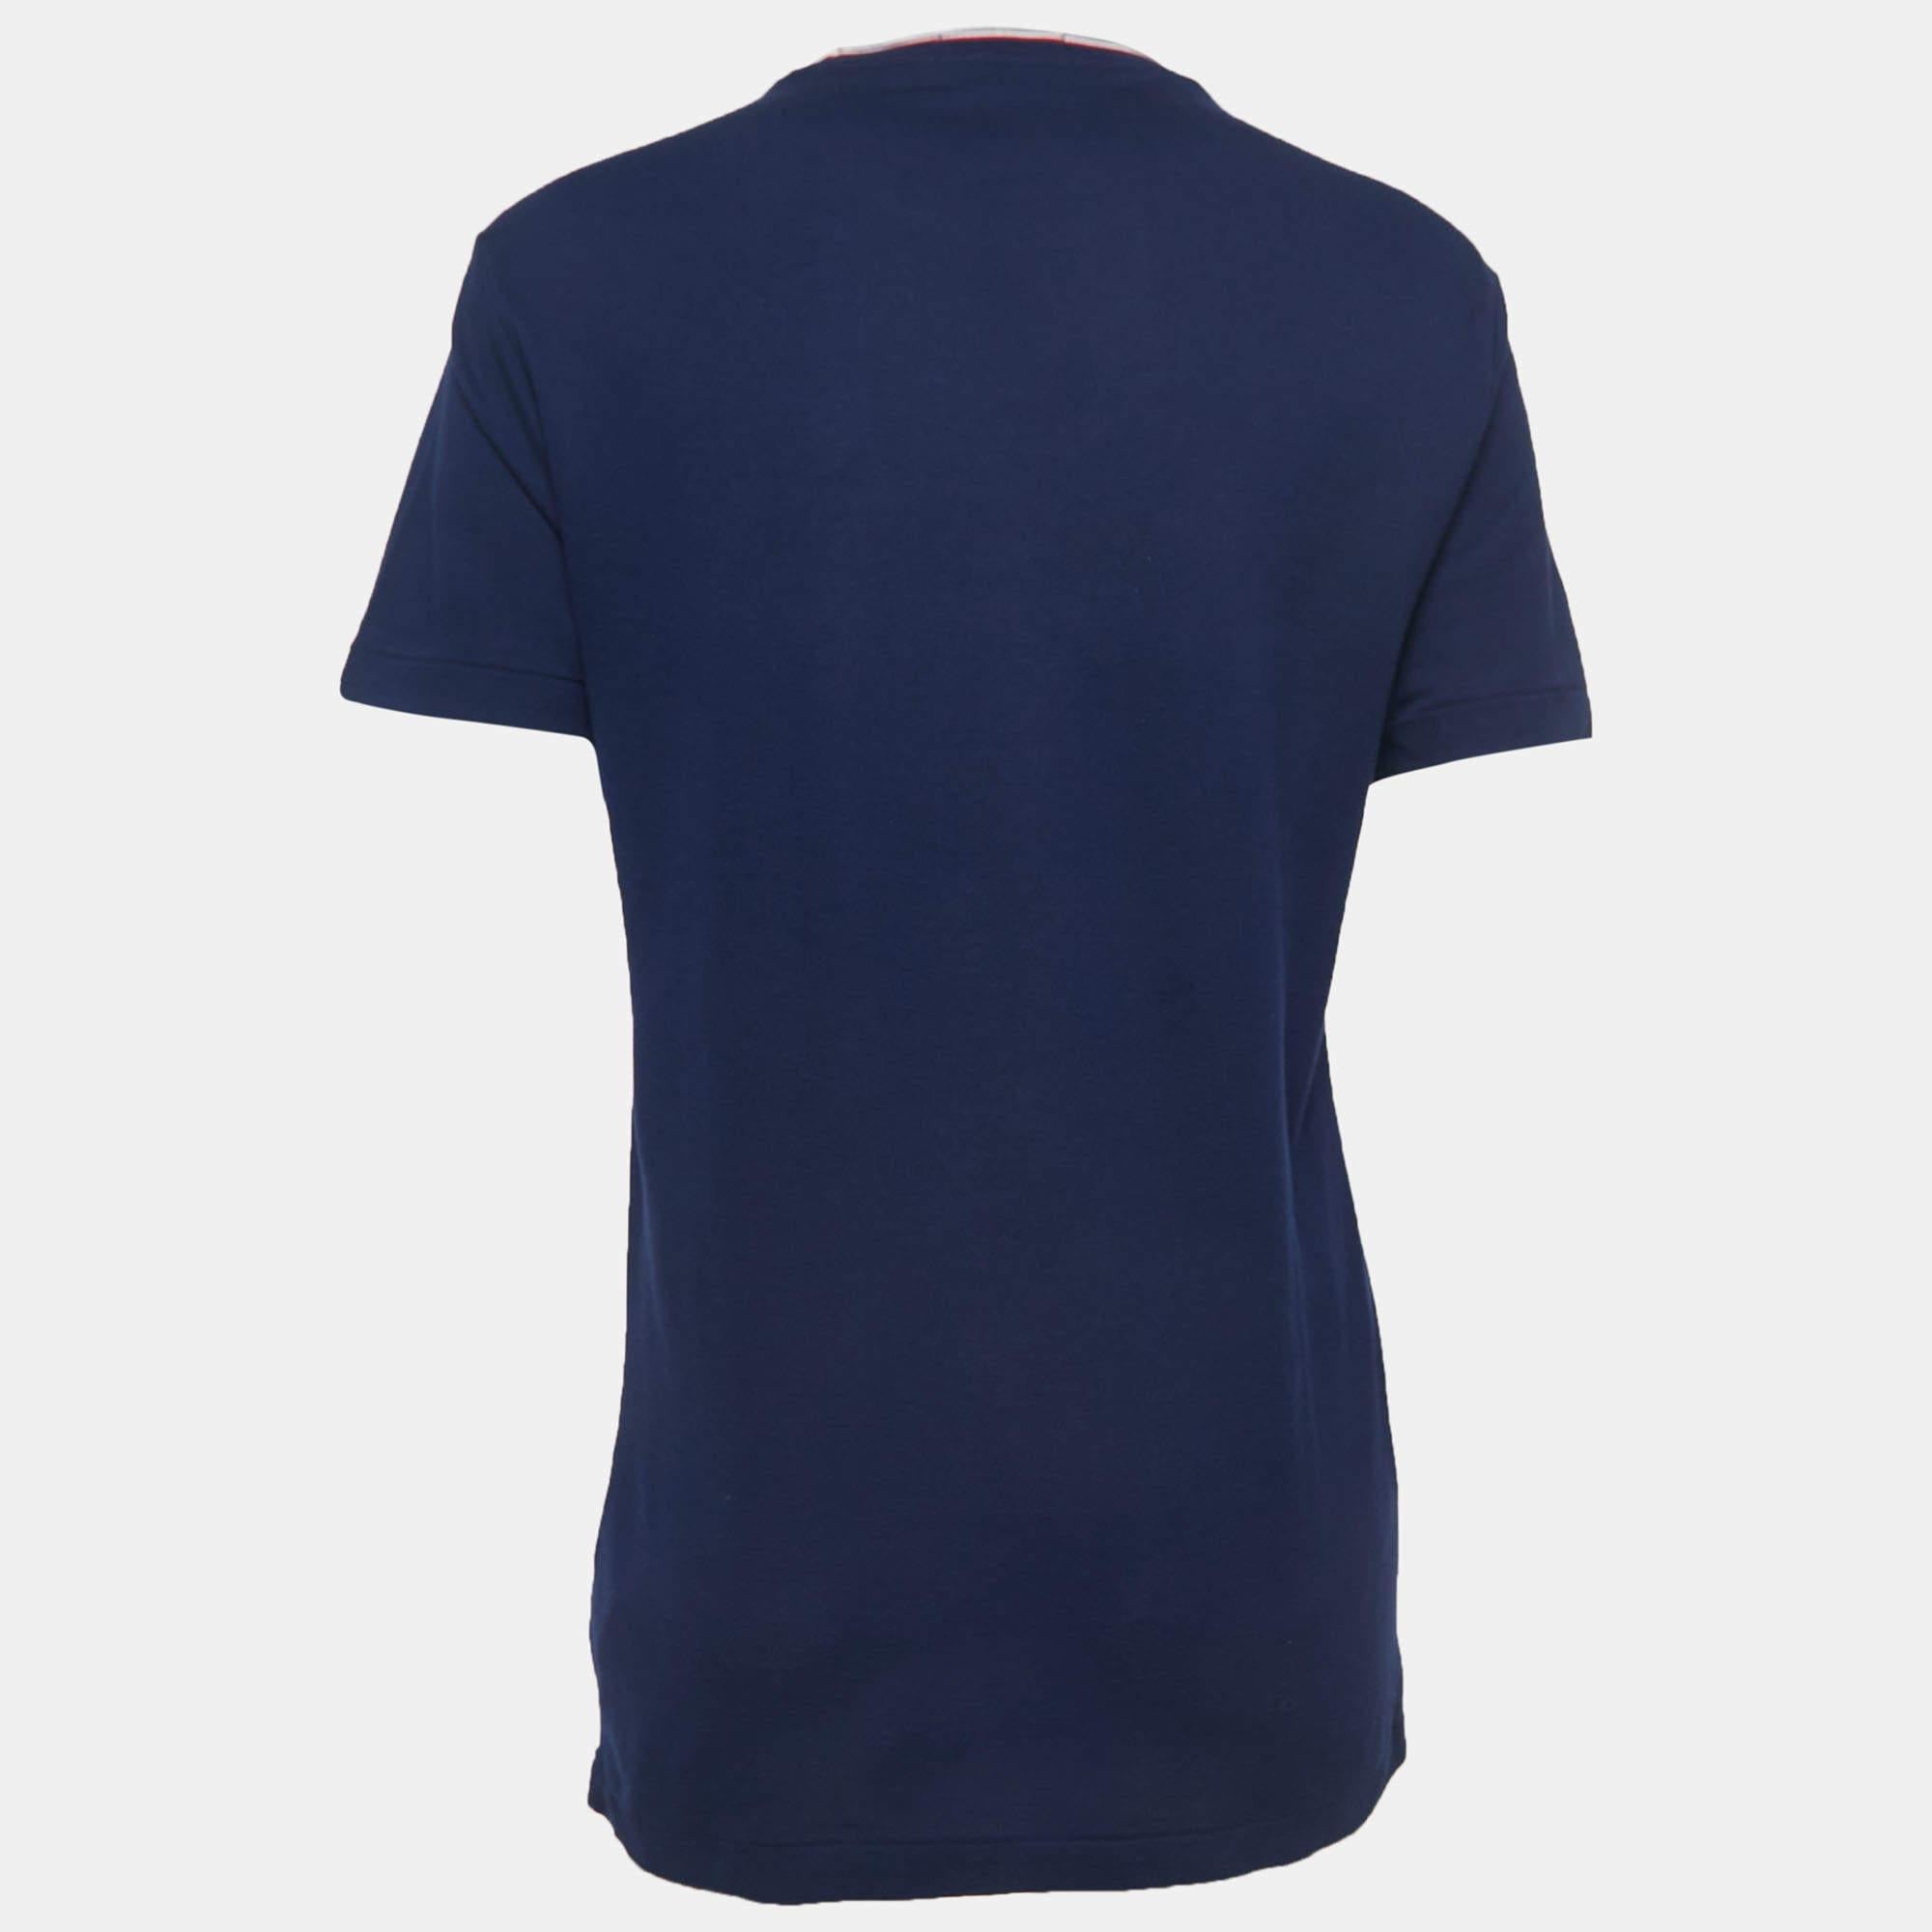 Whether you want to go out on casual outings with friends or just want to lounge around, this t-shirt is a versatile piece and can be styled in many ways. It has been made using fine fabric.

Includes
Brand Tag, The Luxury Closet Packaging